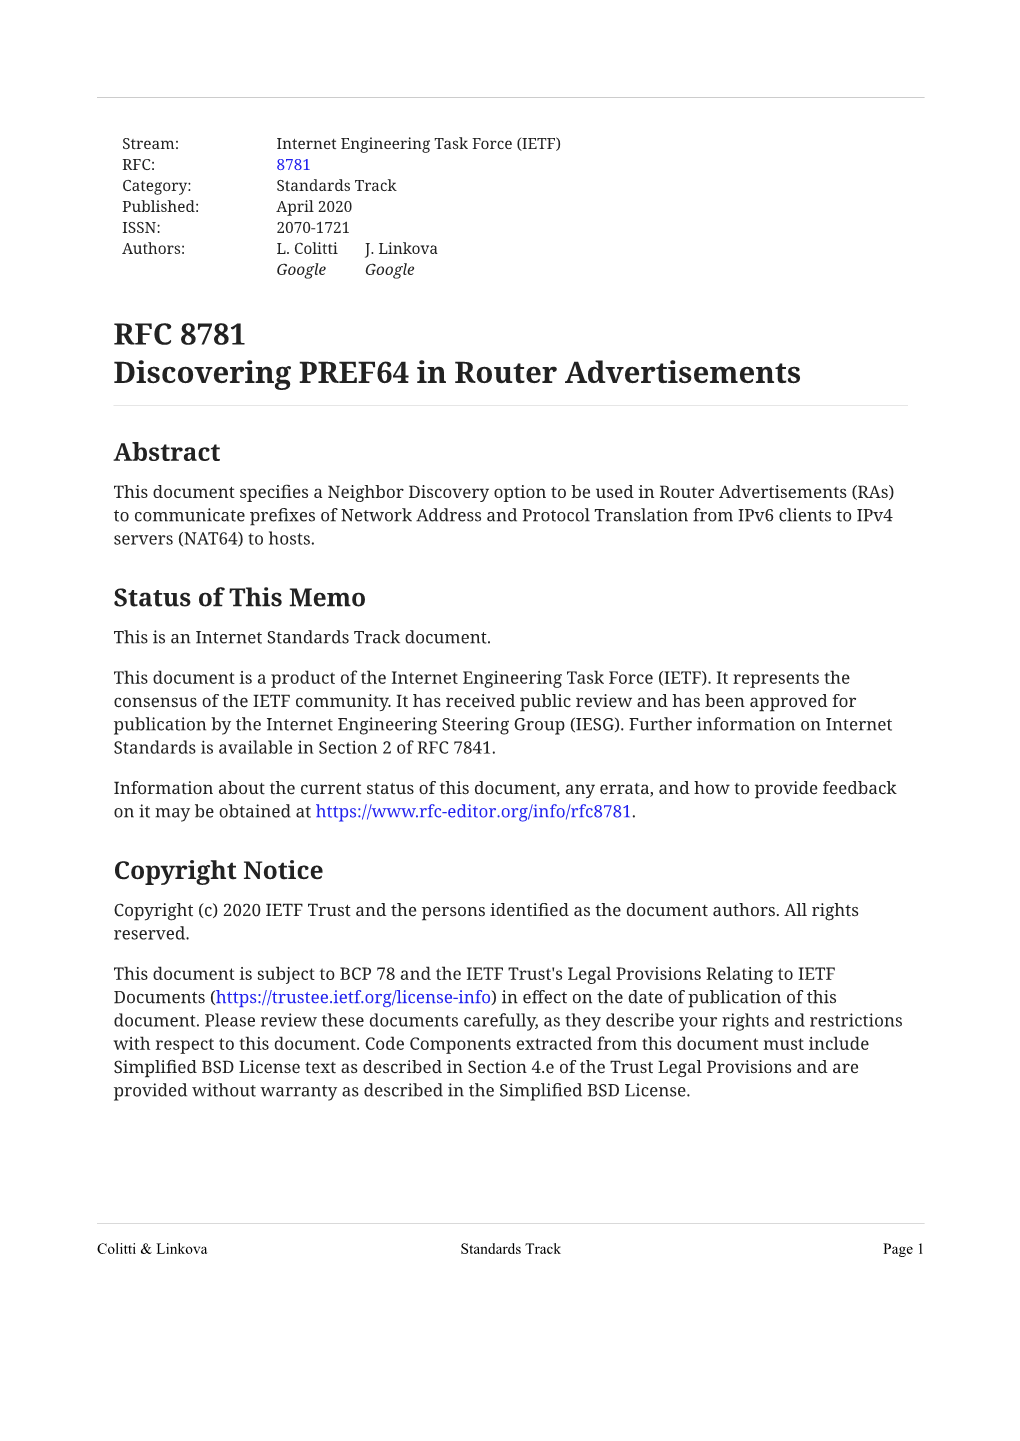 RFC 8781 Discovering PREF64 in Router Advertisements